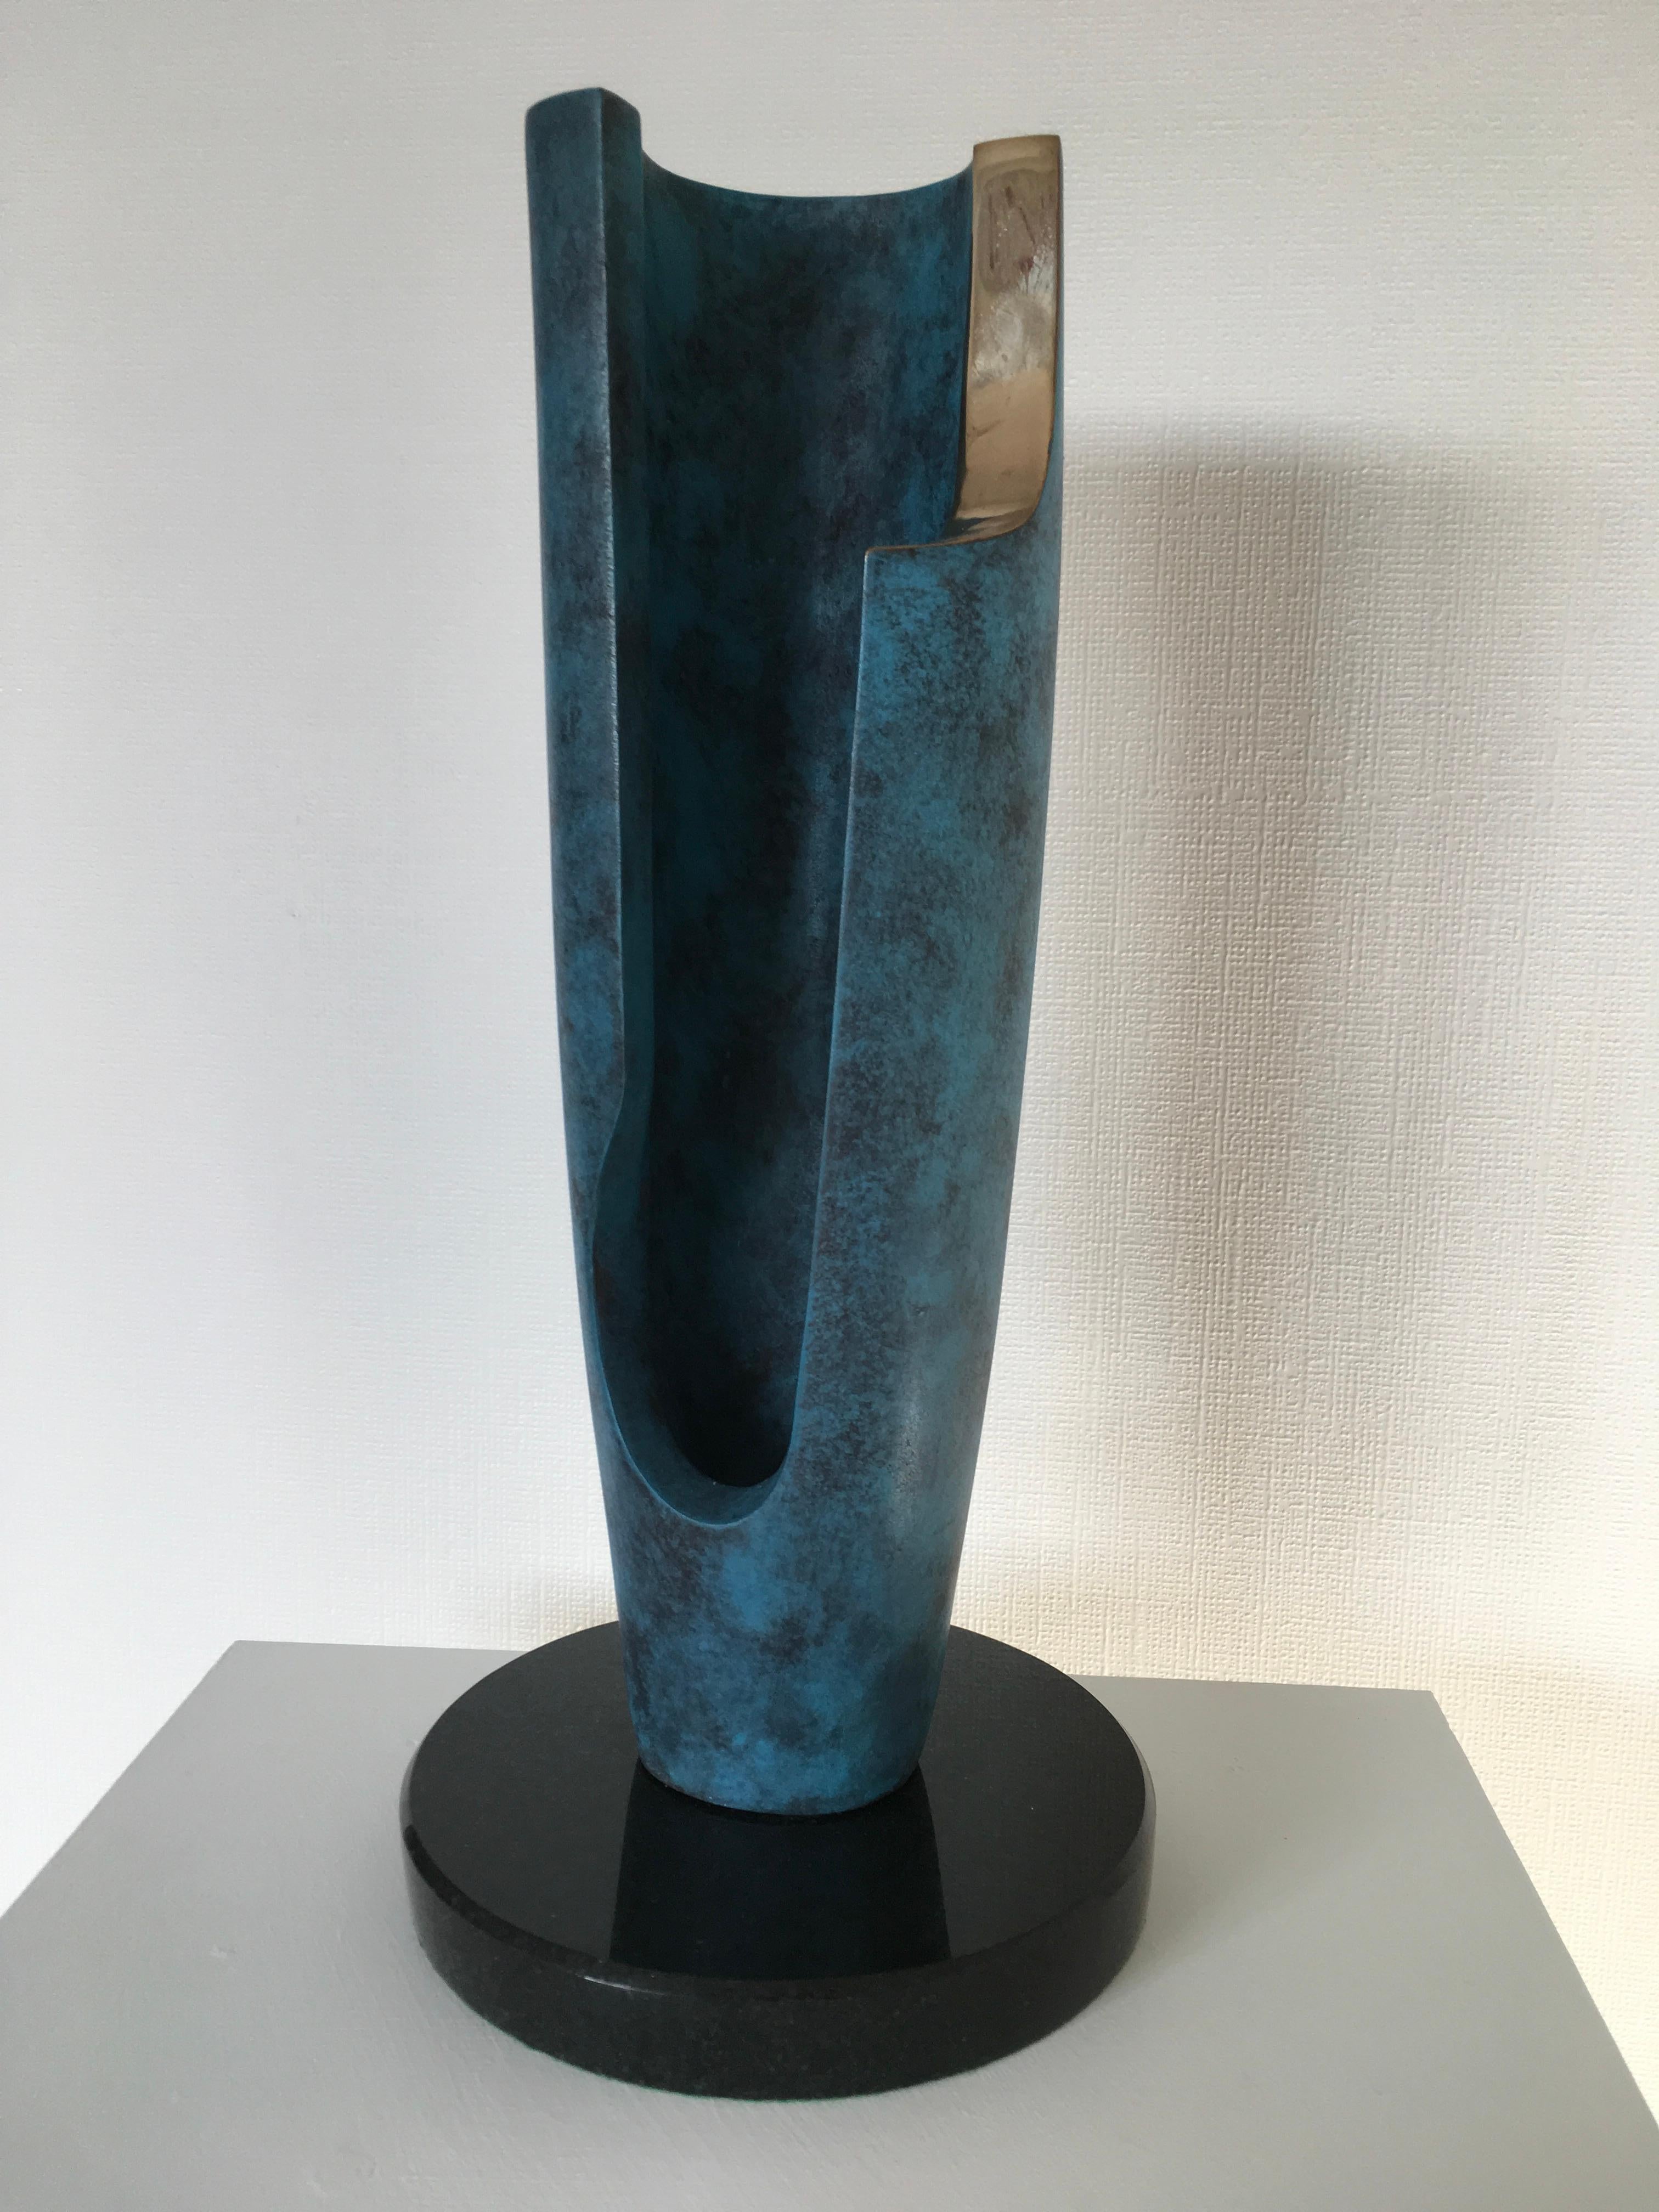 Tall Hollow  - Tabletop limited edition sculpture Bronze  - Sculpture by David Sprakes